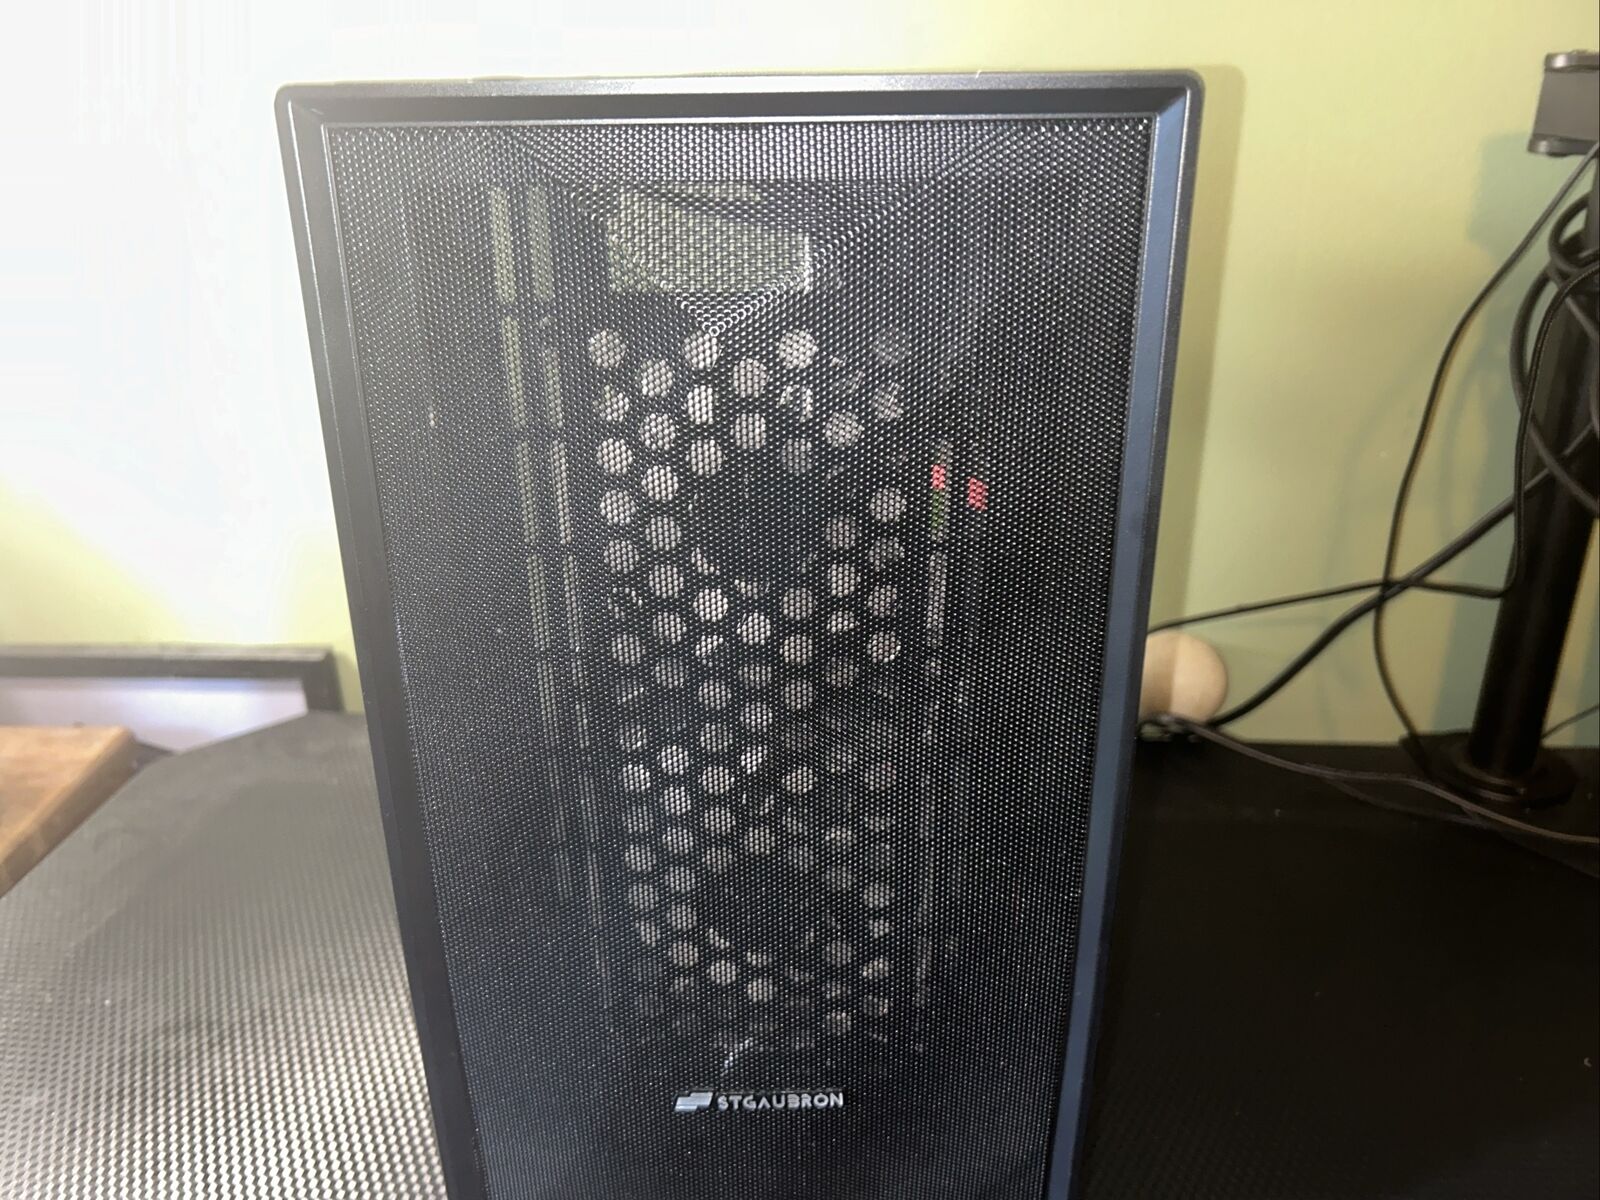 STGAubron Gaming Desktop PC Computer Tower, Intel Core I5 3.3Ghz *Pre Owned*